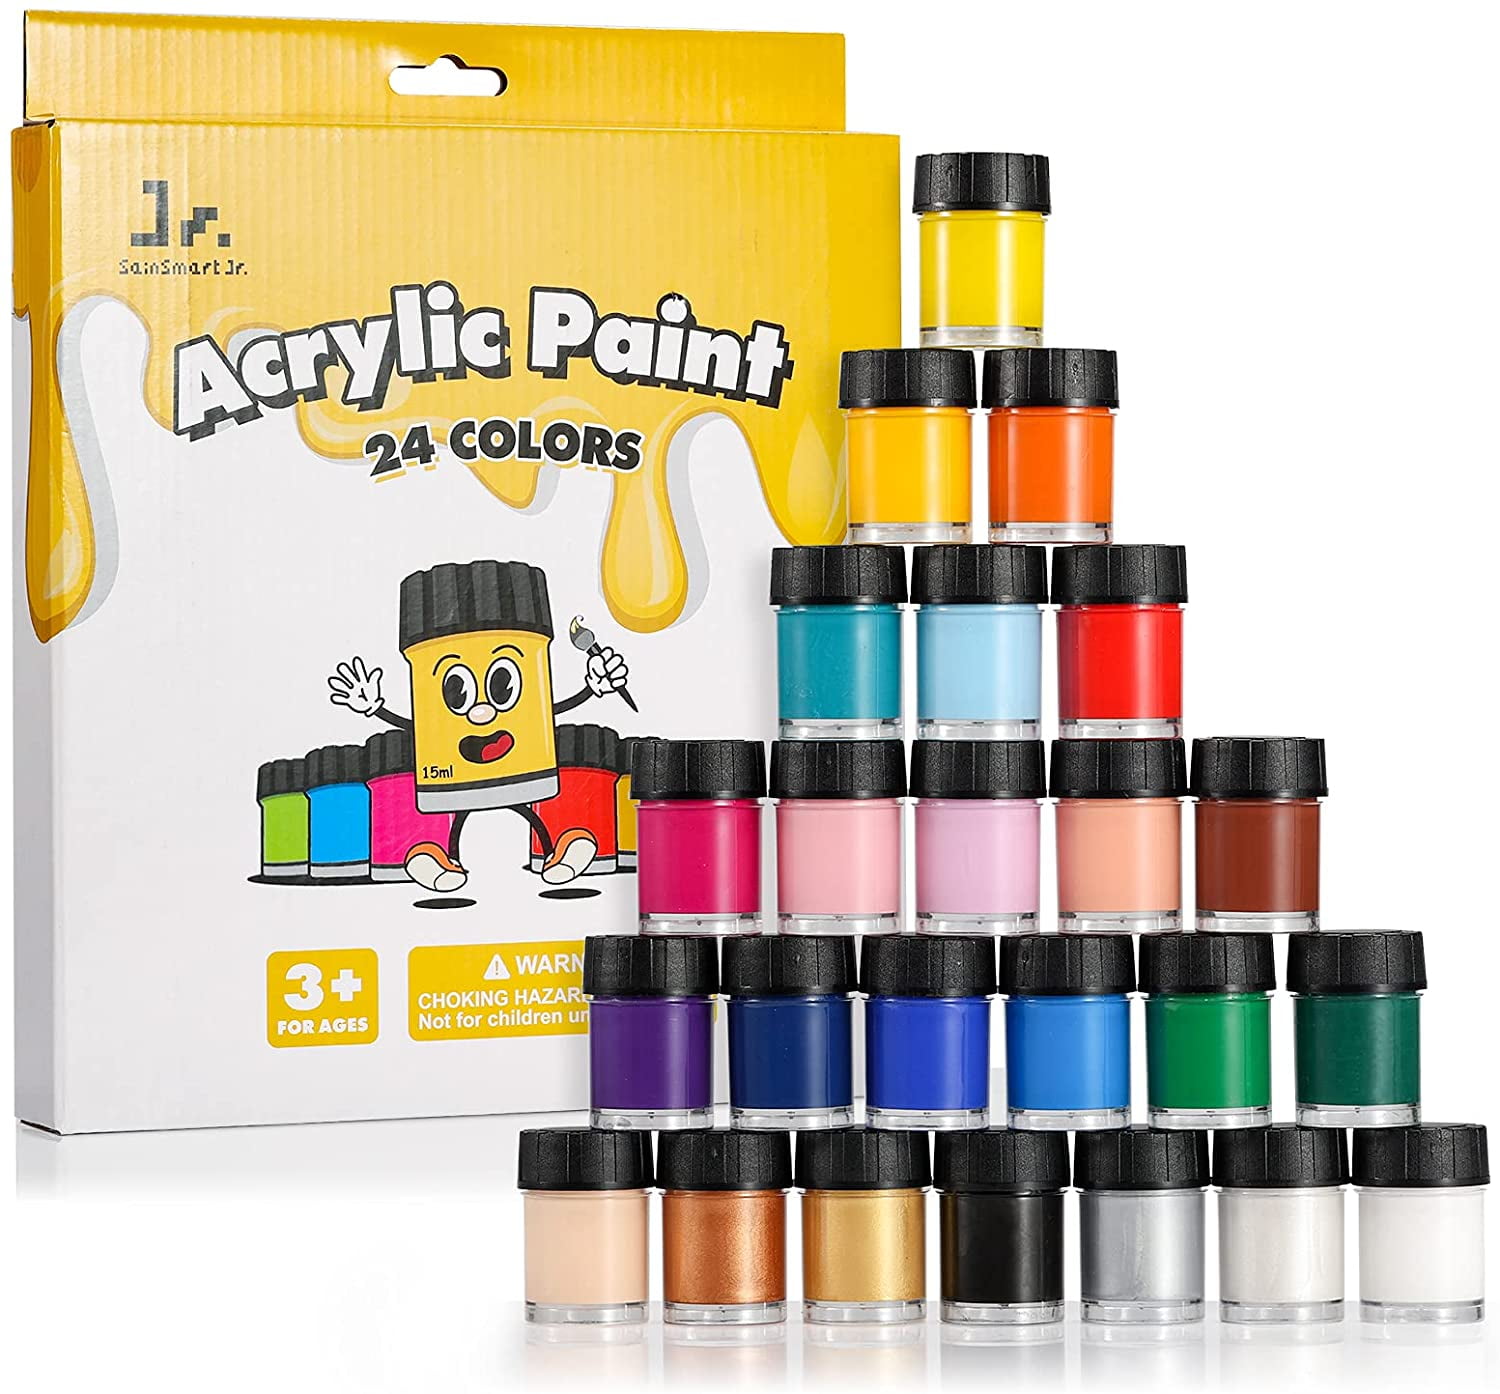 Aen Art Acrylic Paint Set of 24 Colors Craft Paint Supplies for Canvas Painting  Wood Ceramic & Fabric Rich Pigments Non Toxic Paints for Artists & Hobby  Painters 2 fl oz / 60 ml Bottles